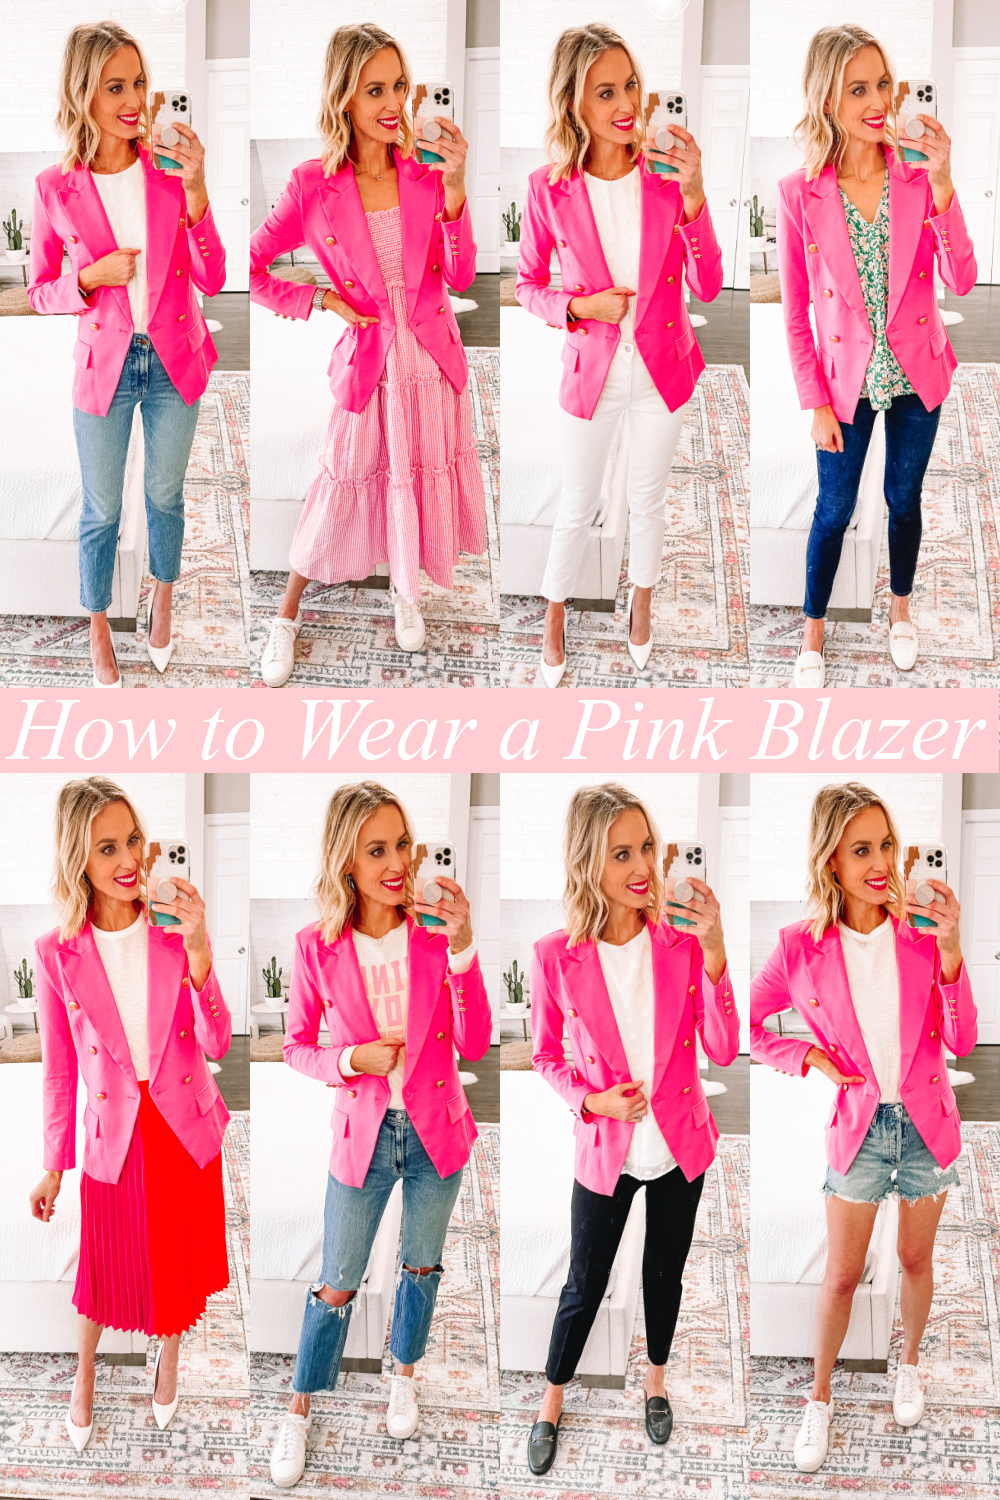 What to wear with a pink blazer